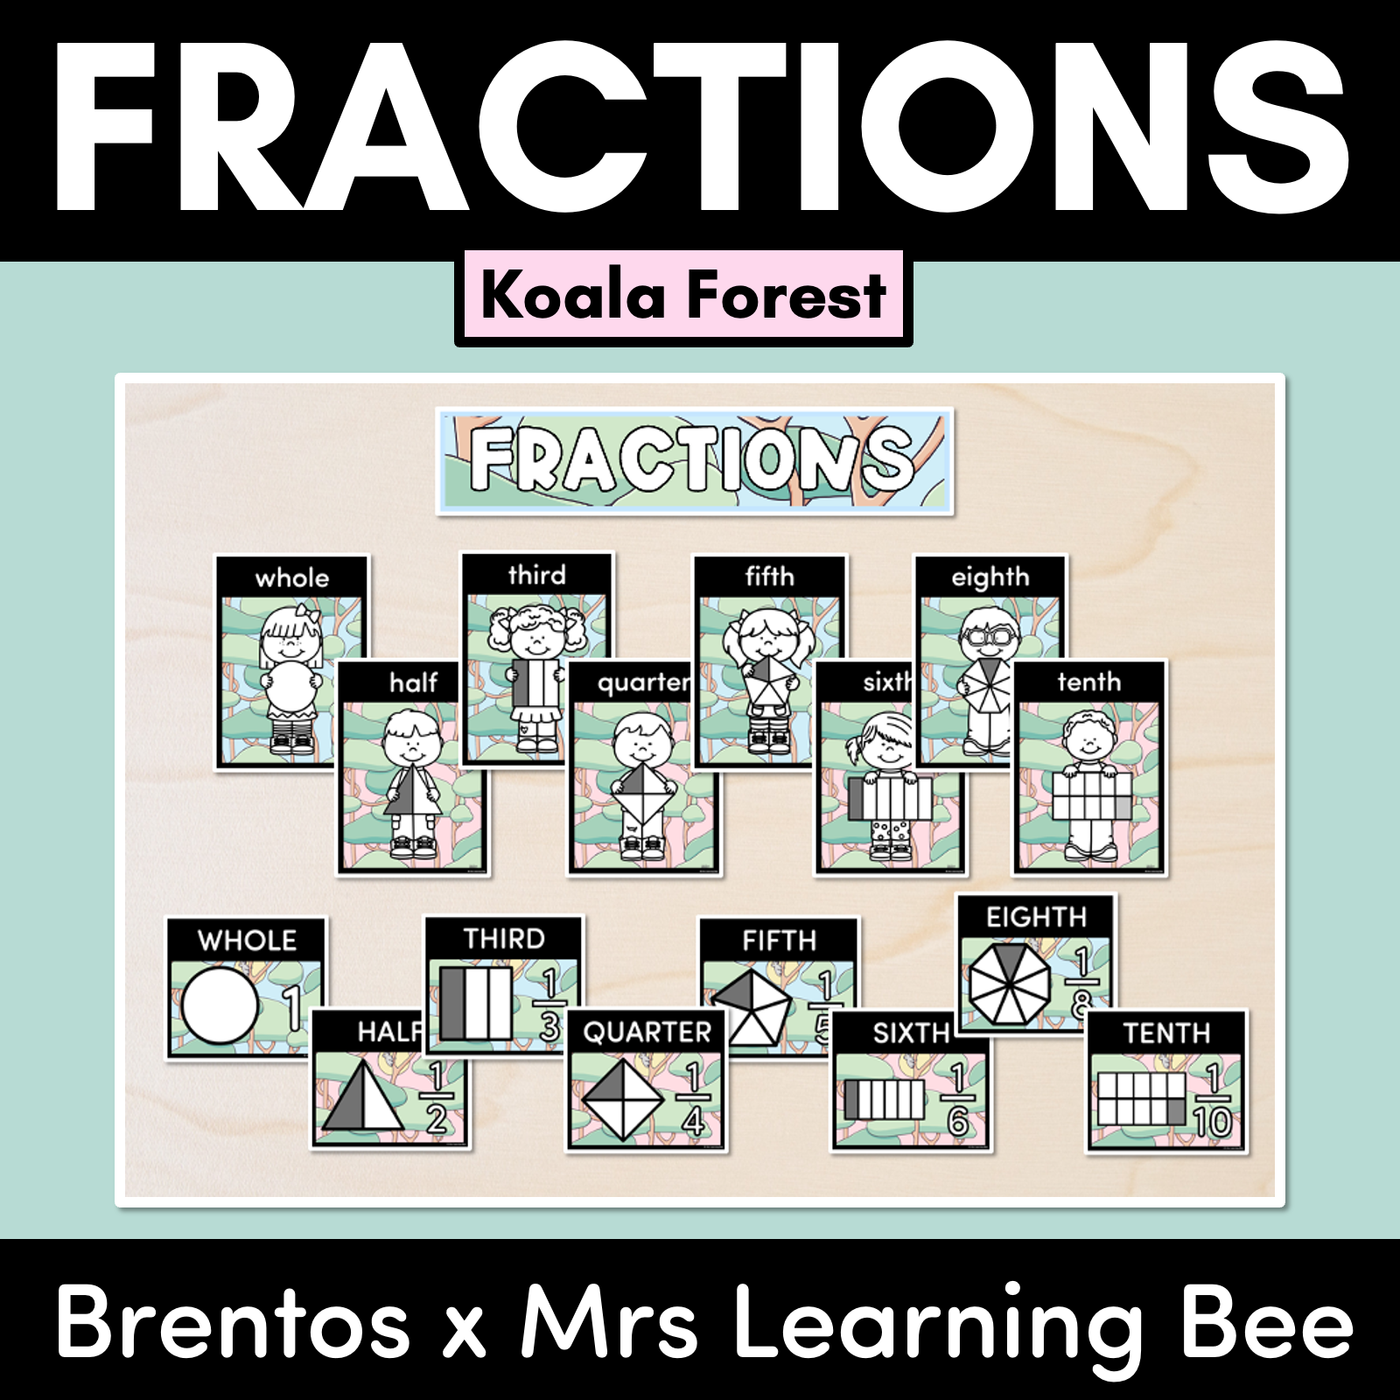 FRACTIONS POSTERS - The Brentos Collection - Koala Forest